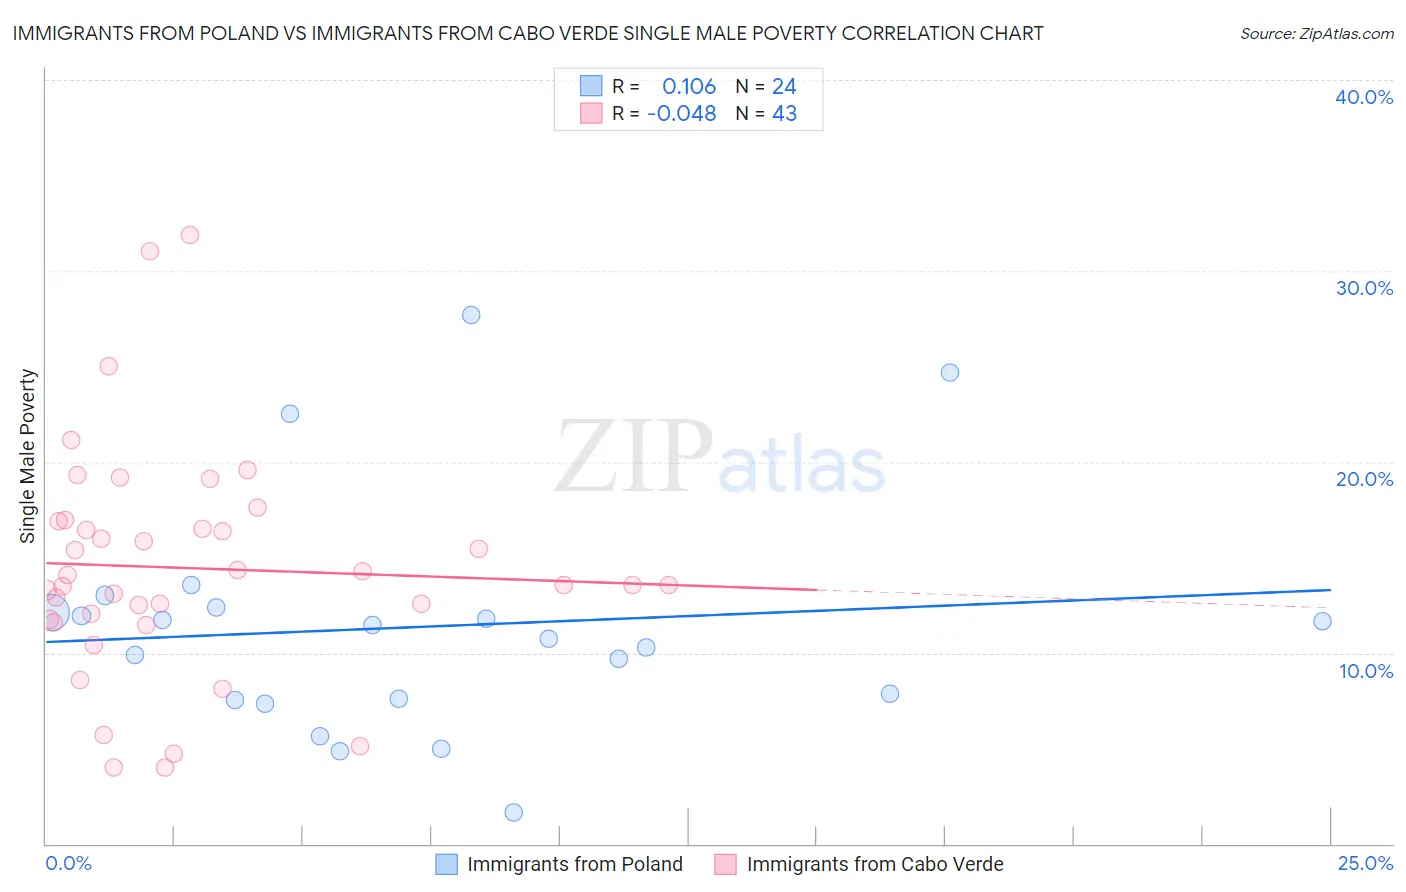 Immigrants from Poland vs Immigrants from Cabo Verde Single Male Poverty